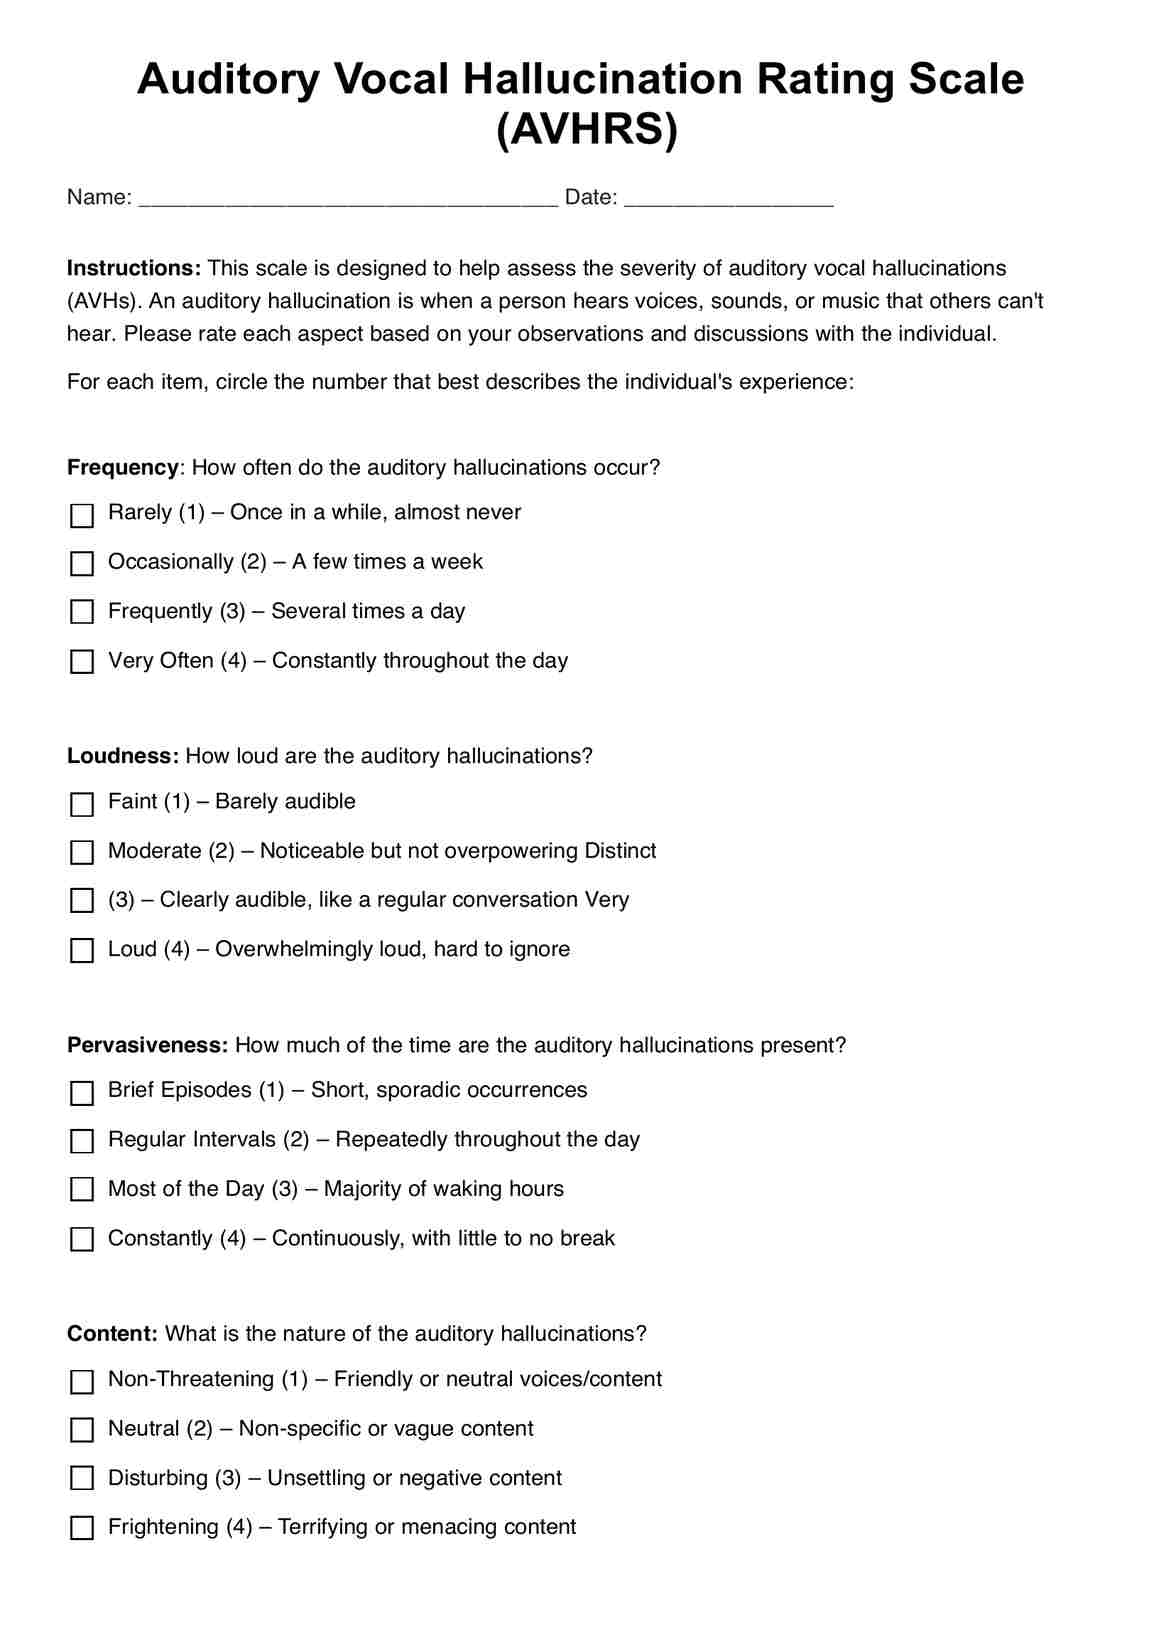 Auditory Vocal Hallucination Rating Scale PDF Example